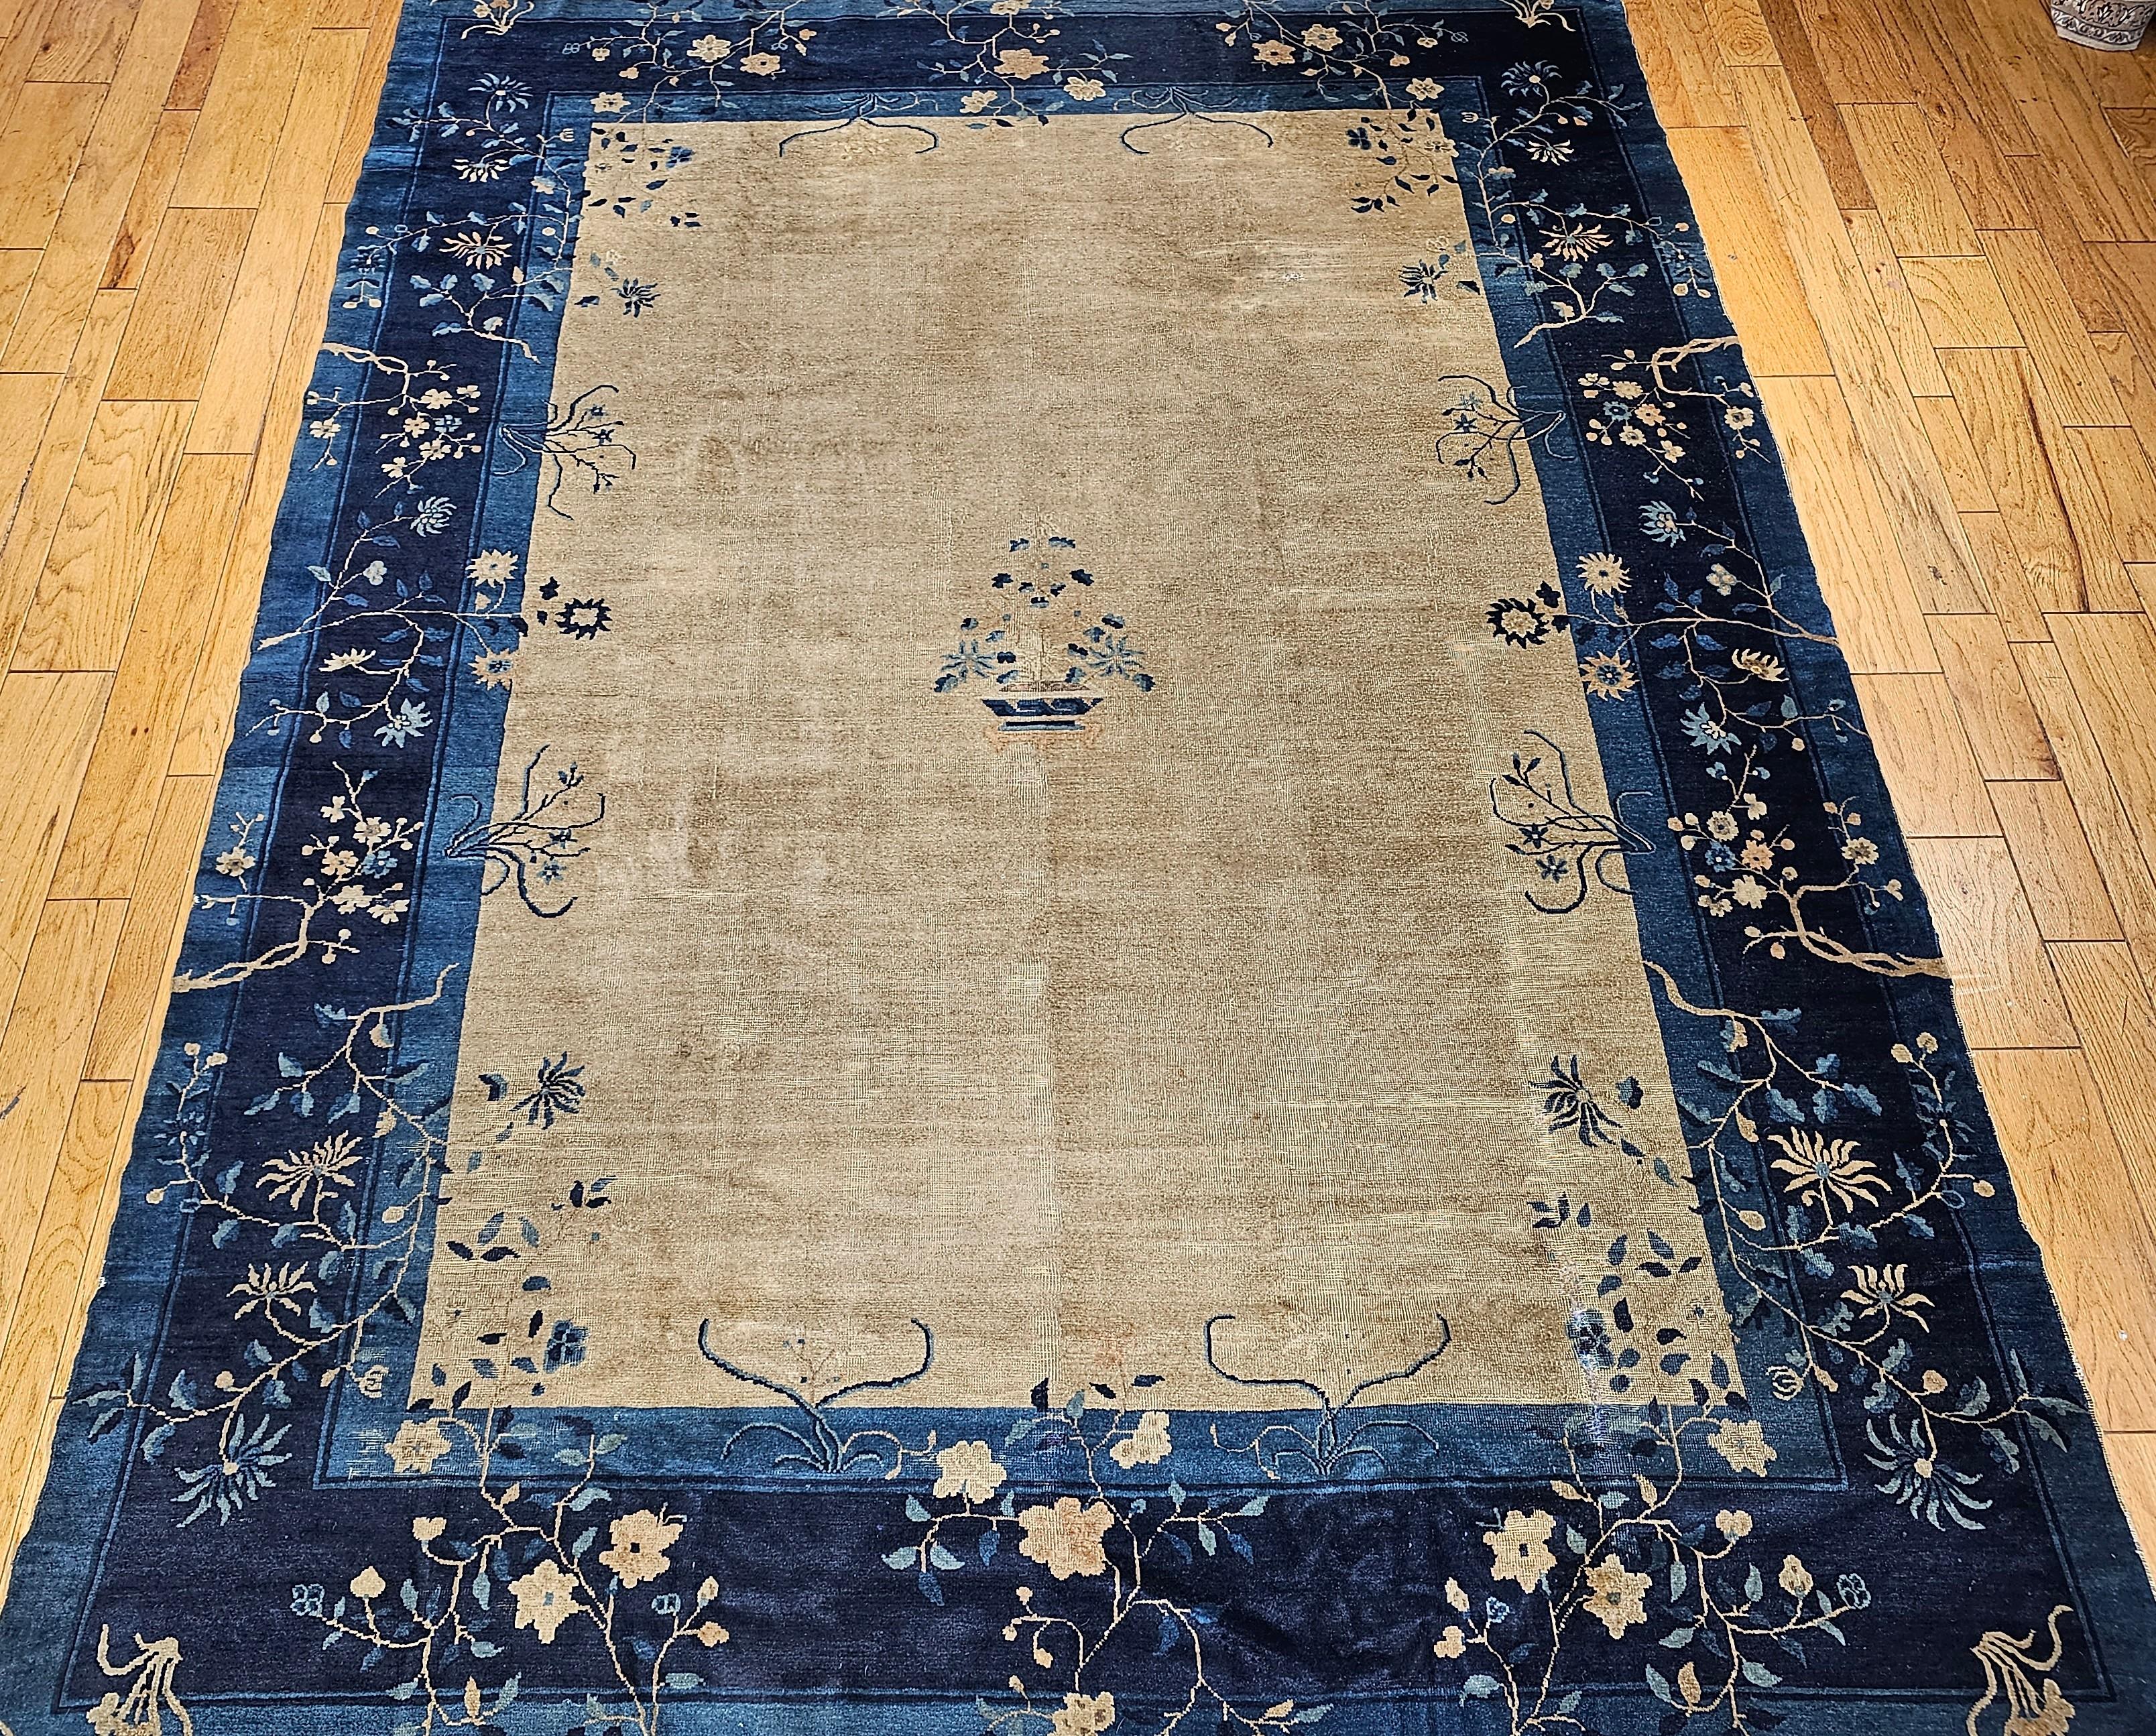 Vintage Chinese Peking room size rug is from the late 19th century.  It has a beautiful natural straw/gray color in the field framed by two shades of blue(Navy and French blues) in the border. This beautiful simple and serene design in this Chinese